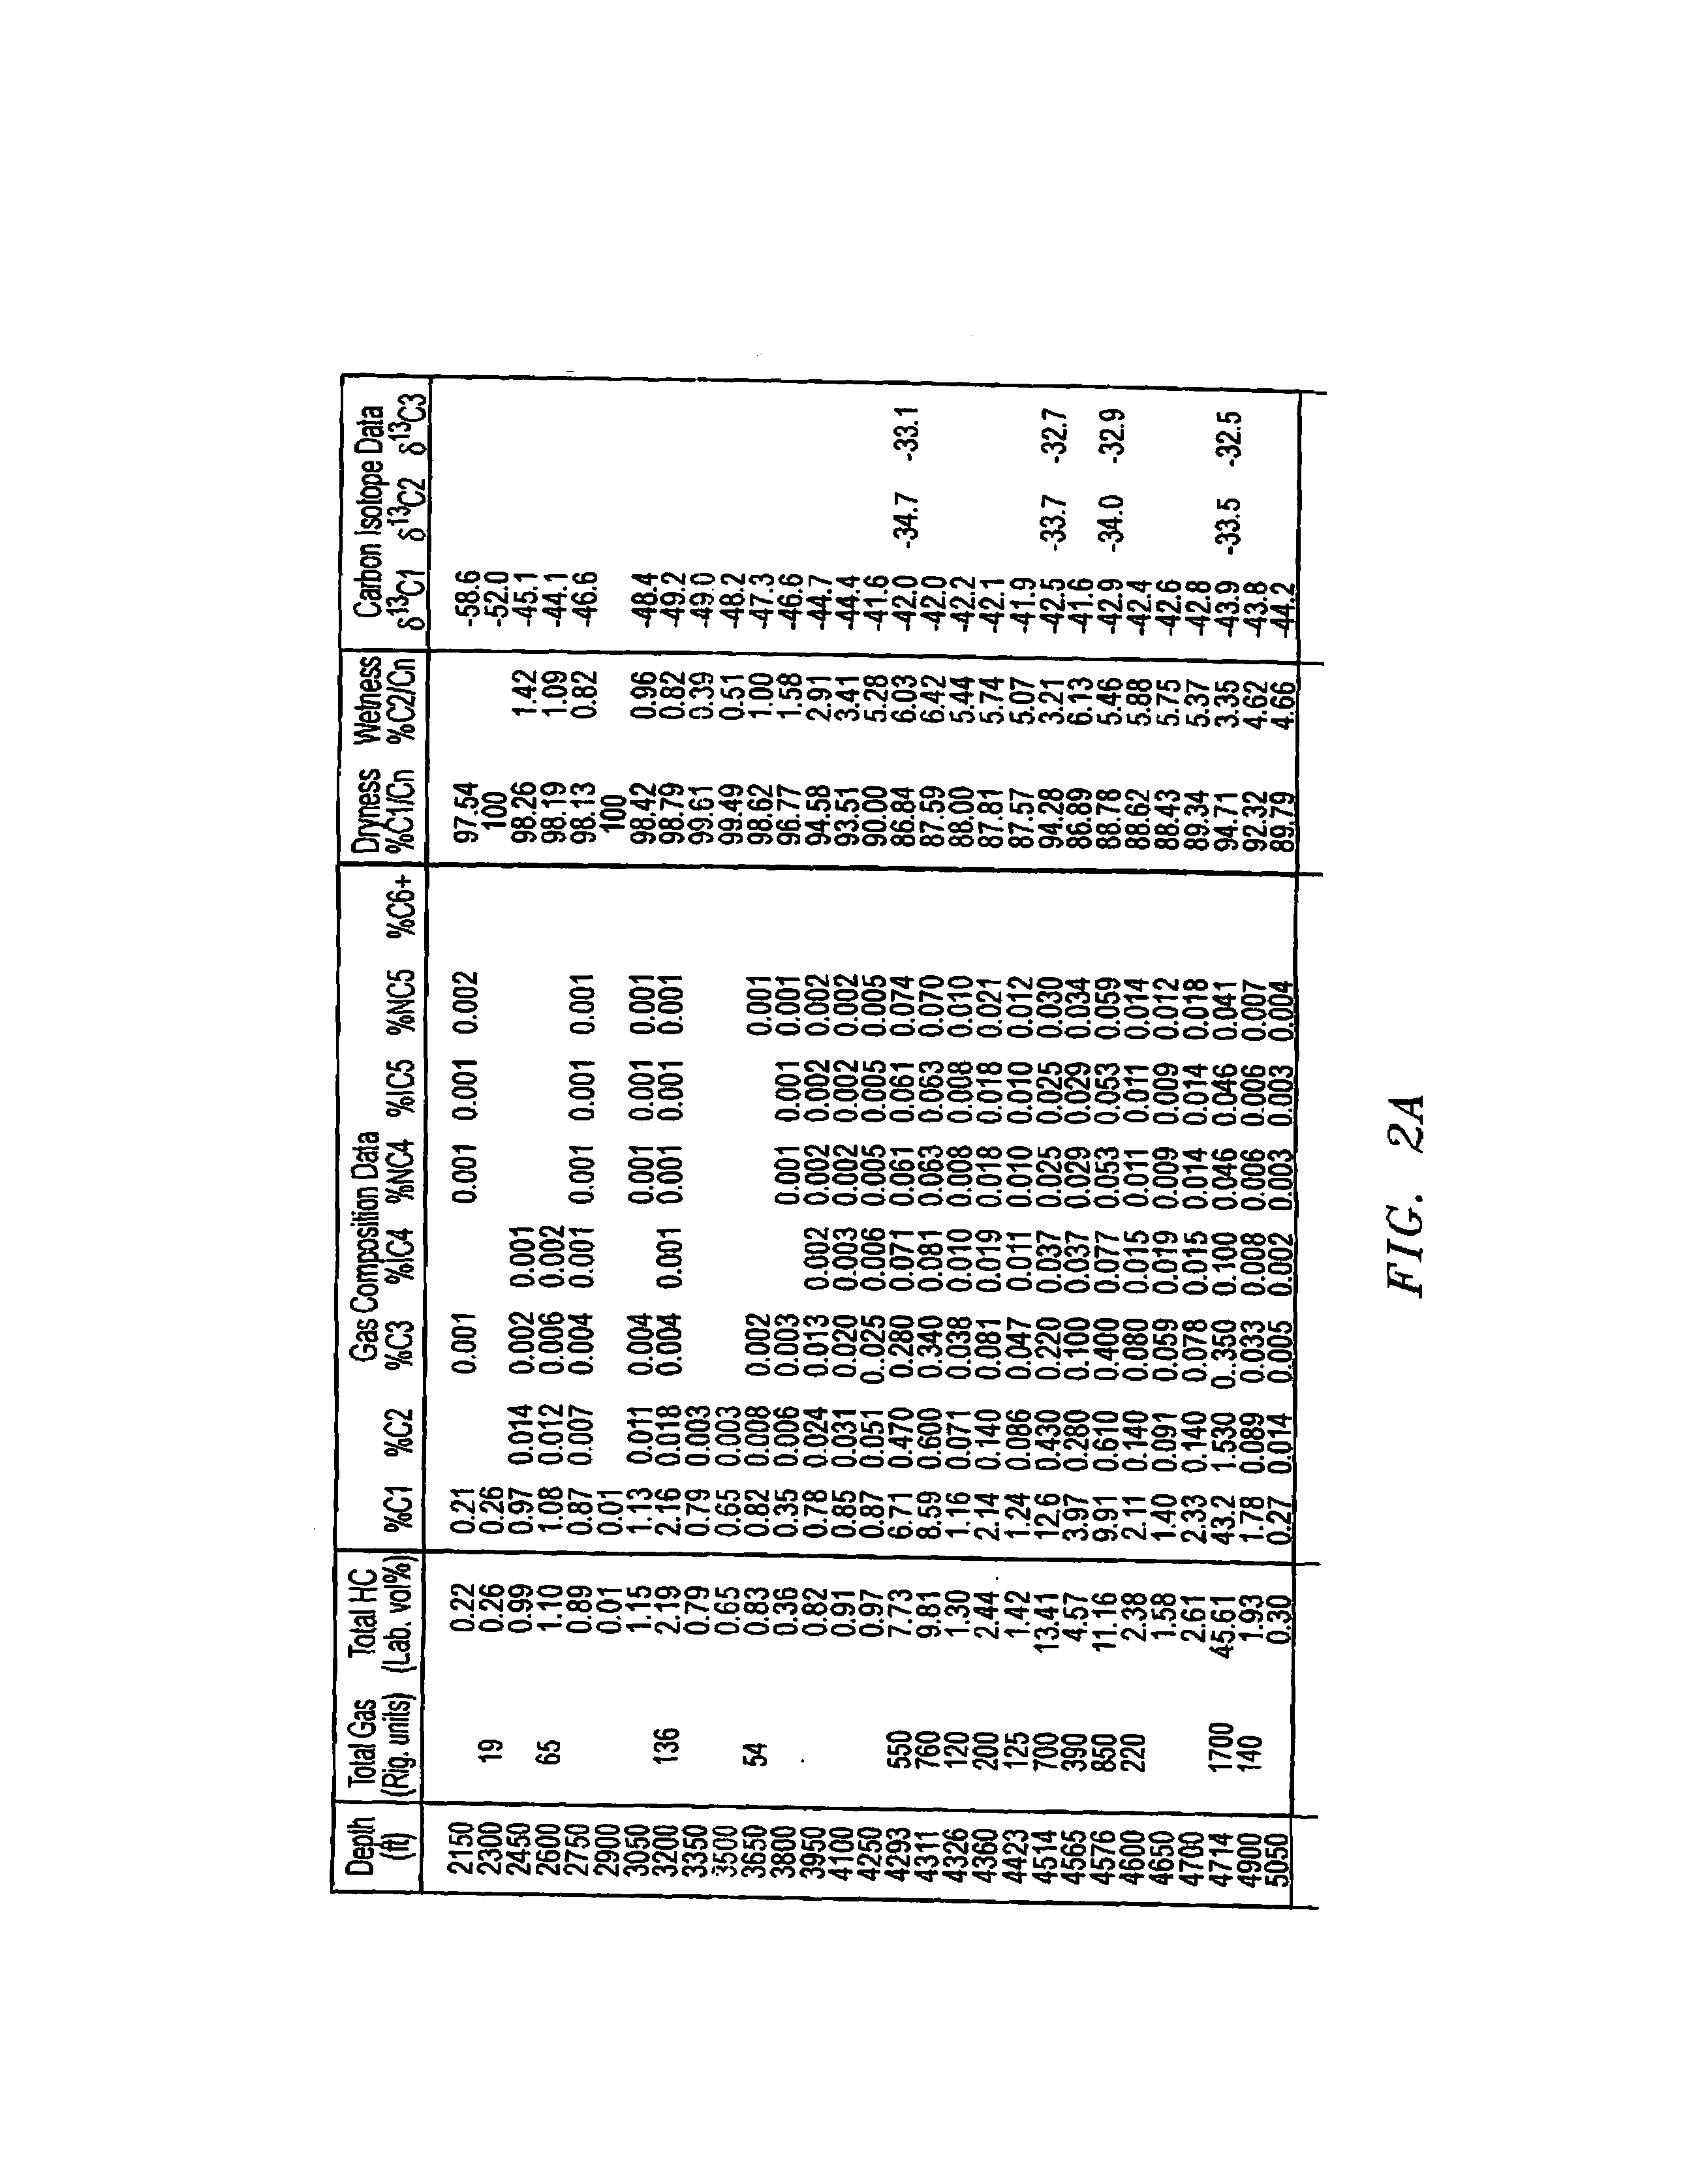 Method and system of processing information derived from gas isotope measurements in association with geophysical and other logs from oil and gas drilling operations